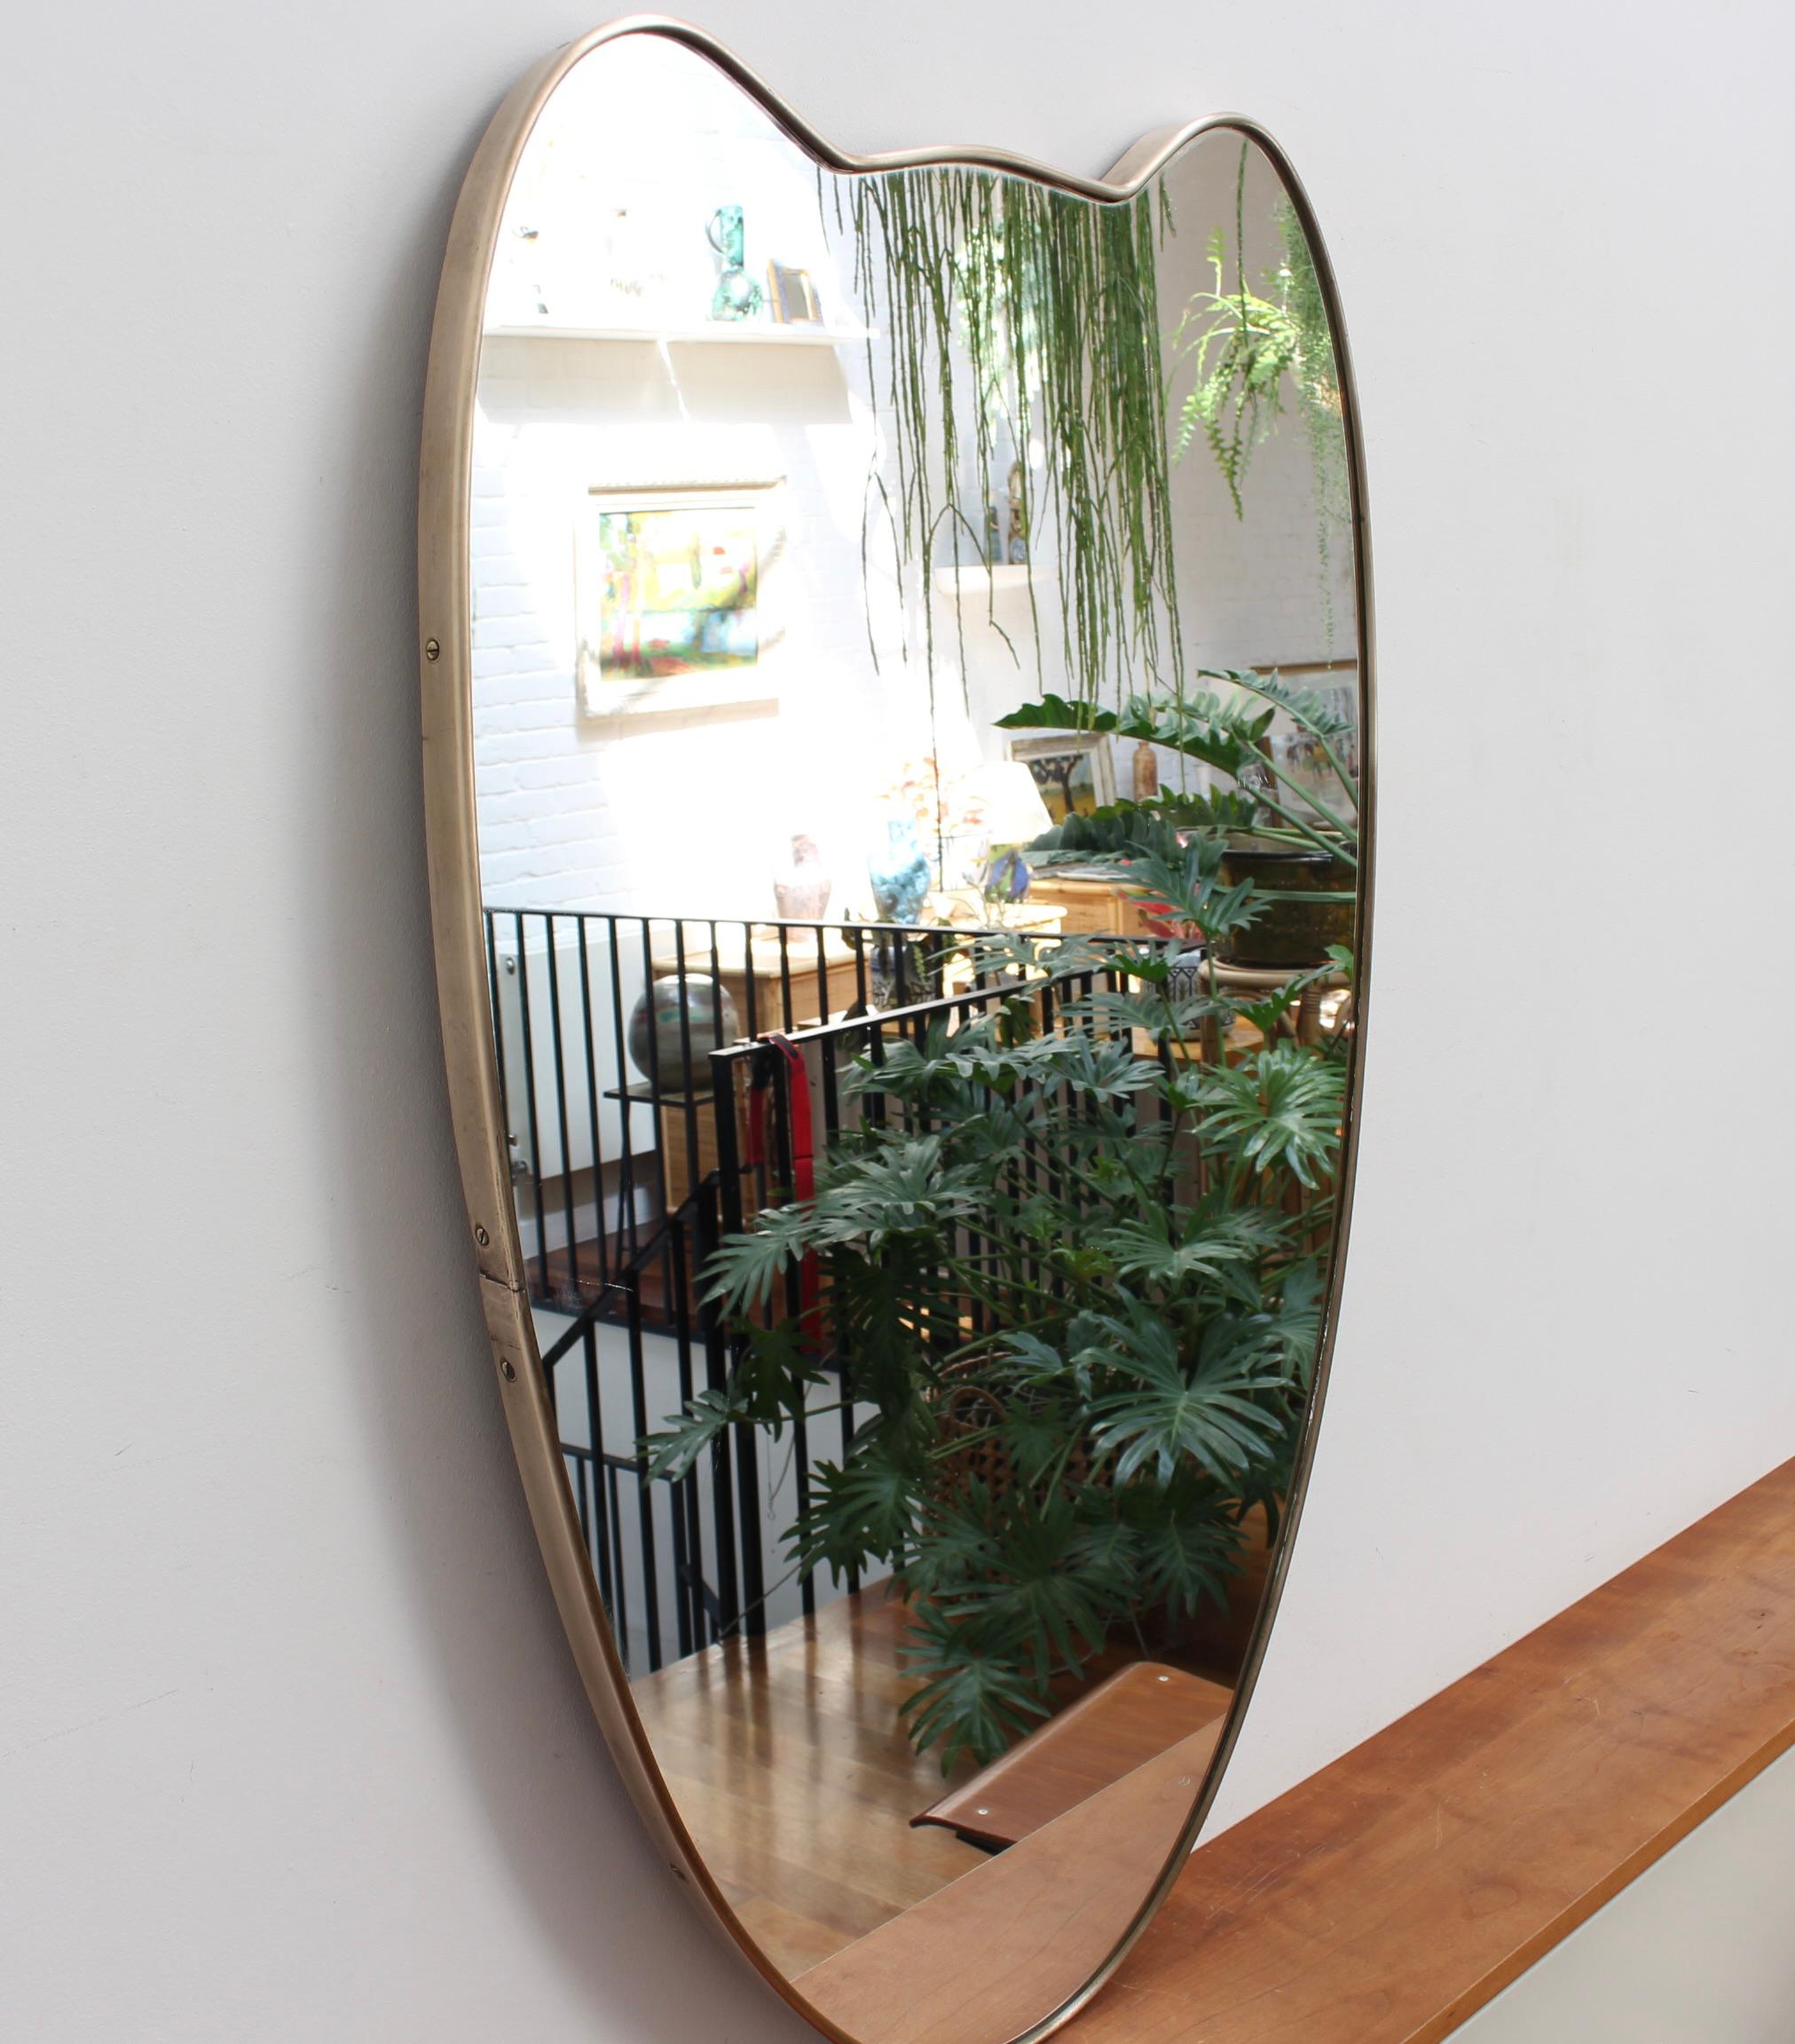 Midcentury Italian wall mirror with brass frame (circa 1950s). The mirror is classically-shaped and distinctive in a Modern style. It is in very good overall condition. A beautiful, aged patina will develop on the recently polished brass frame over